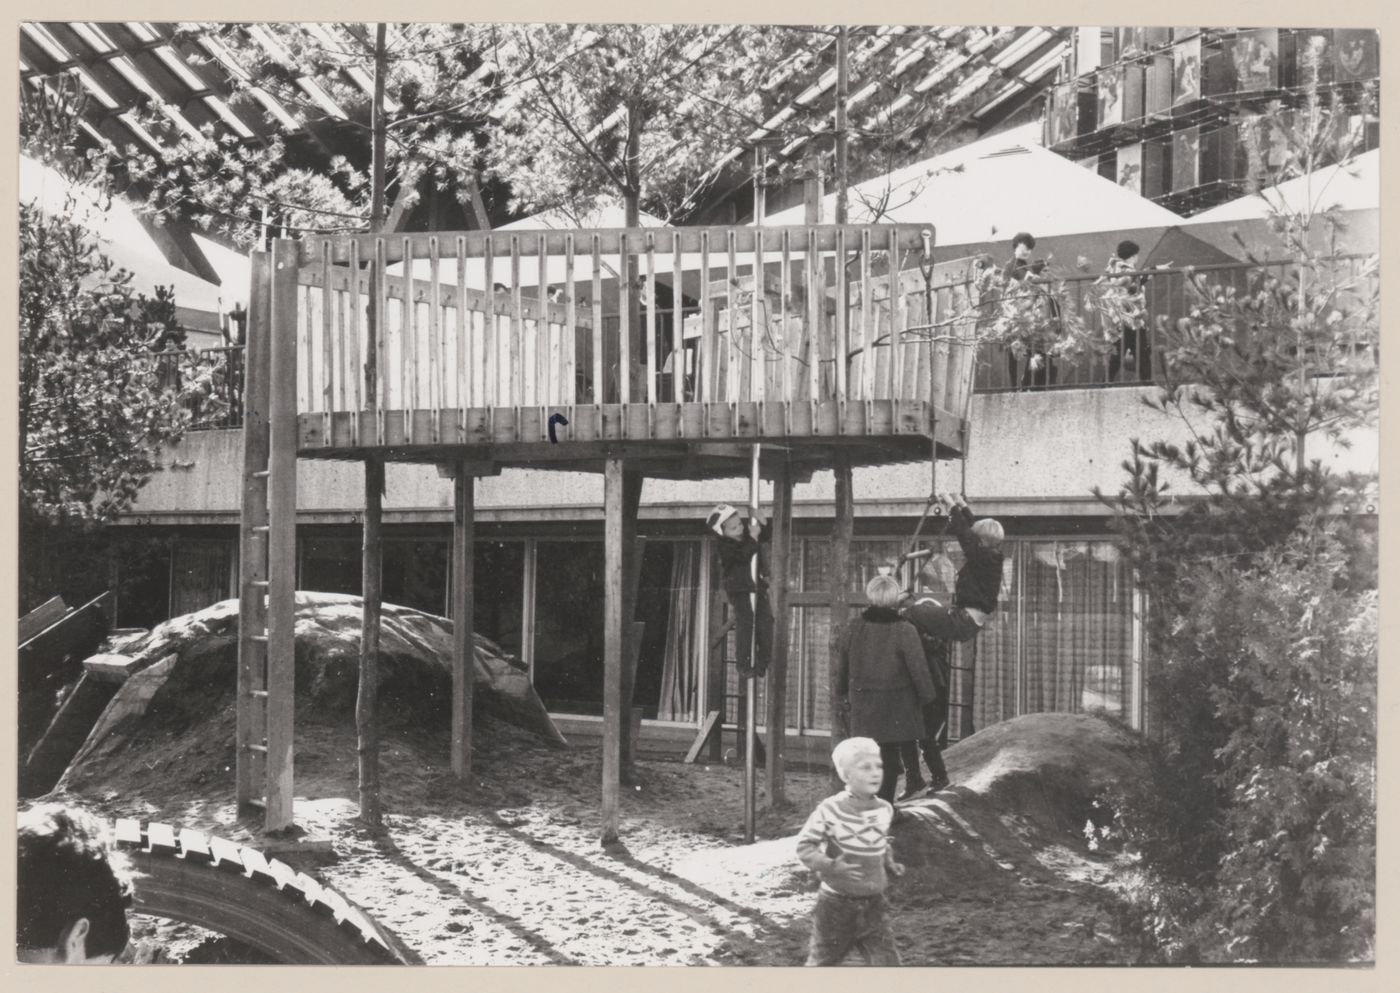 View of treehouse with mound and curved bridge in Children's Creative Centre Playground, Canadian Federal Pavilion, Expo '67, Montréal, Québec